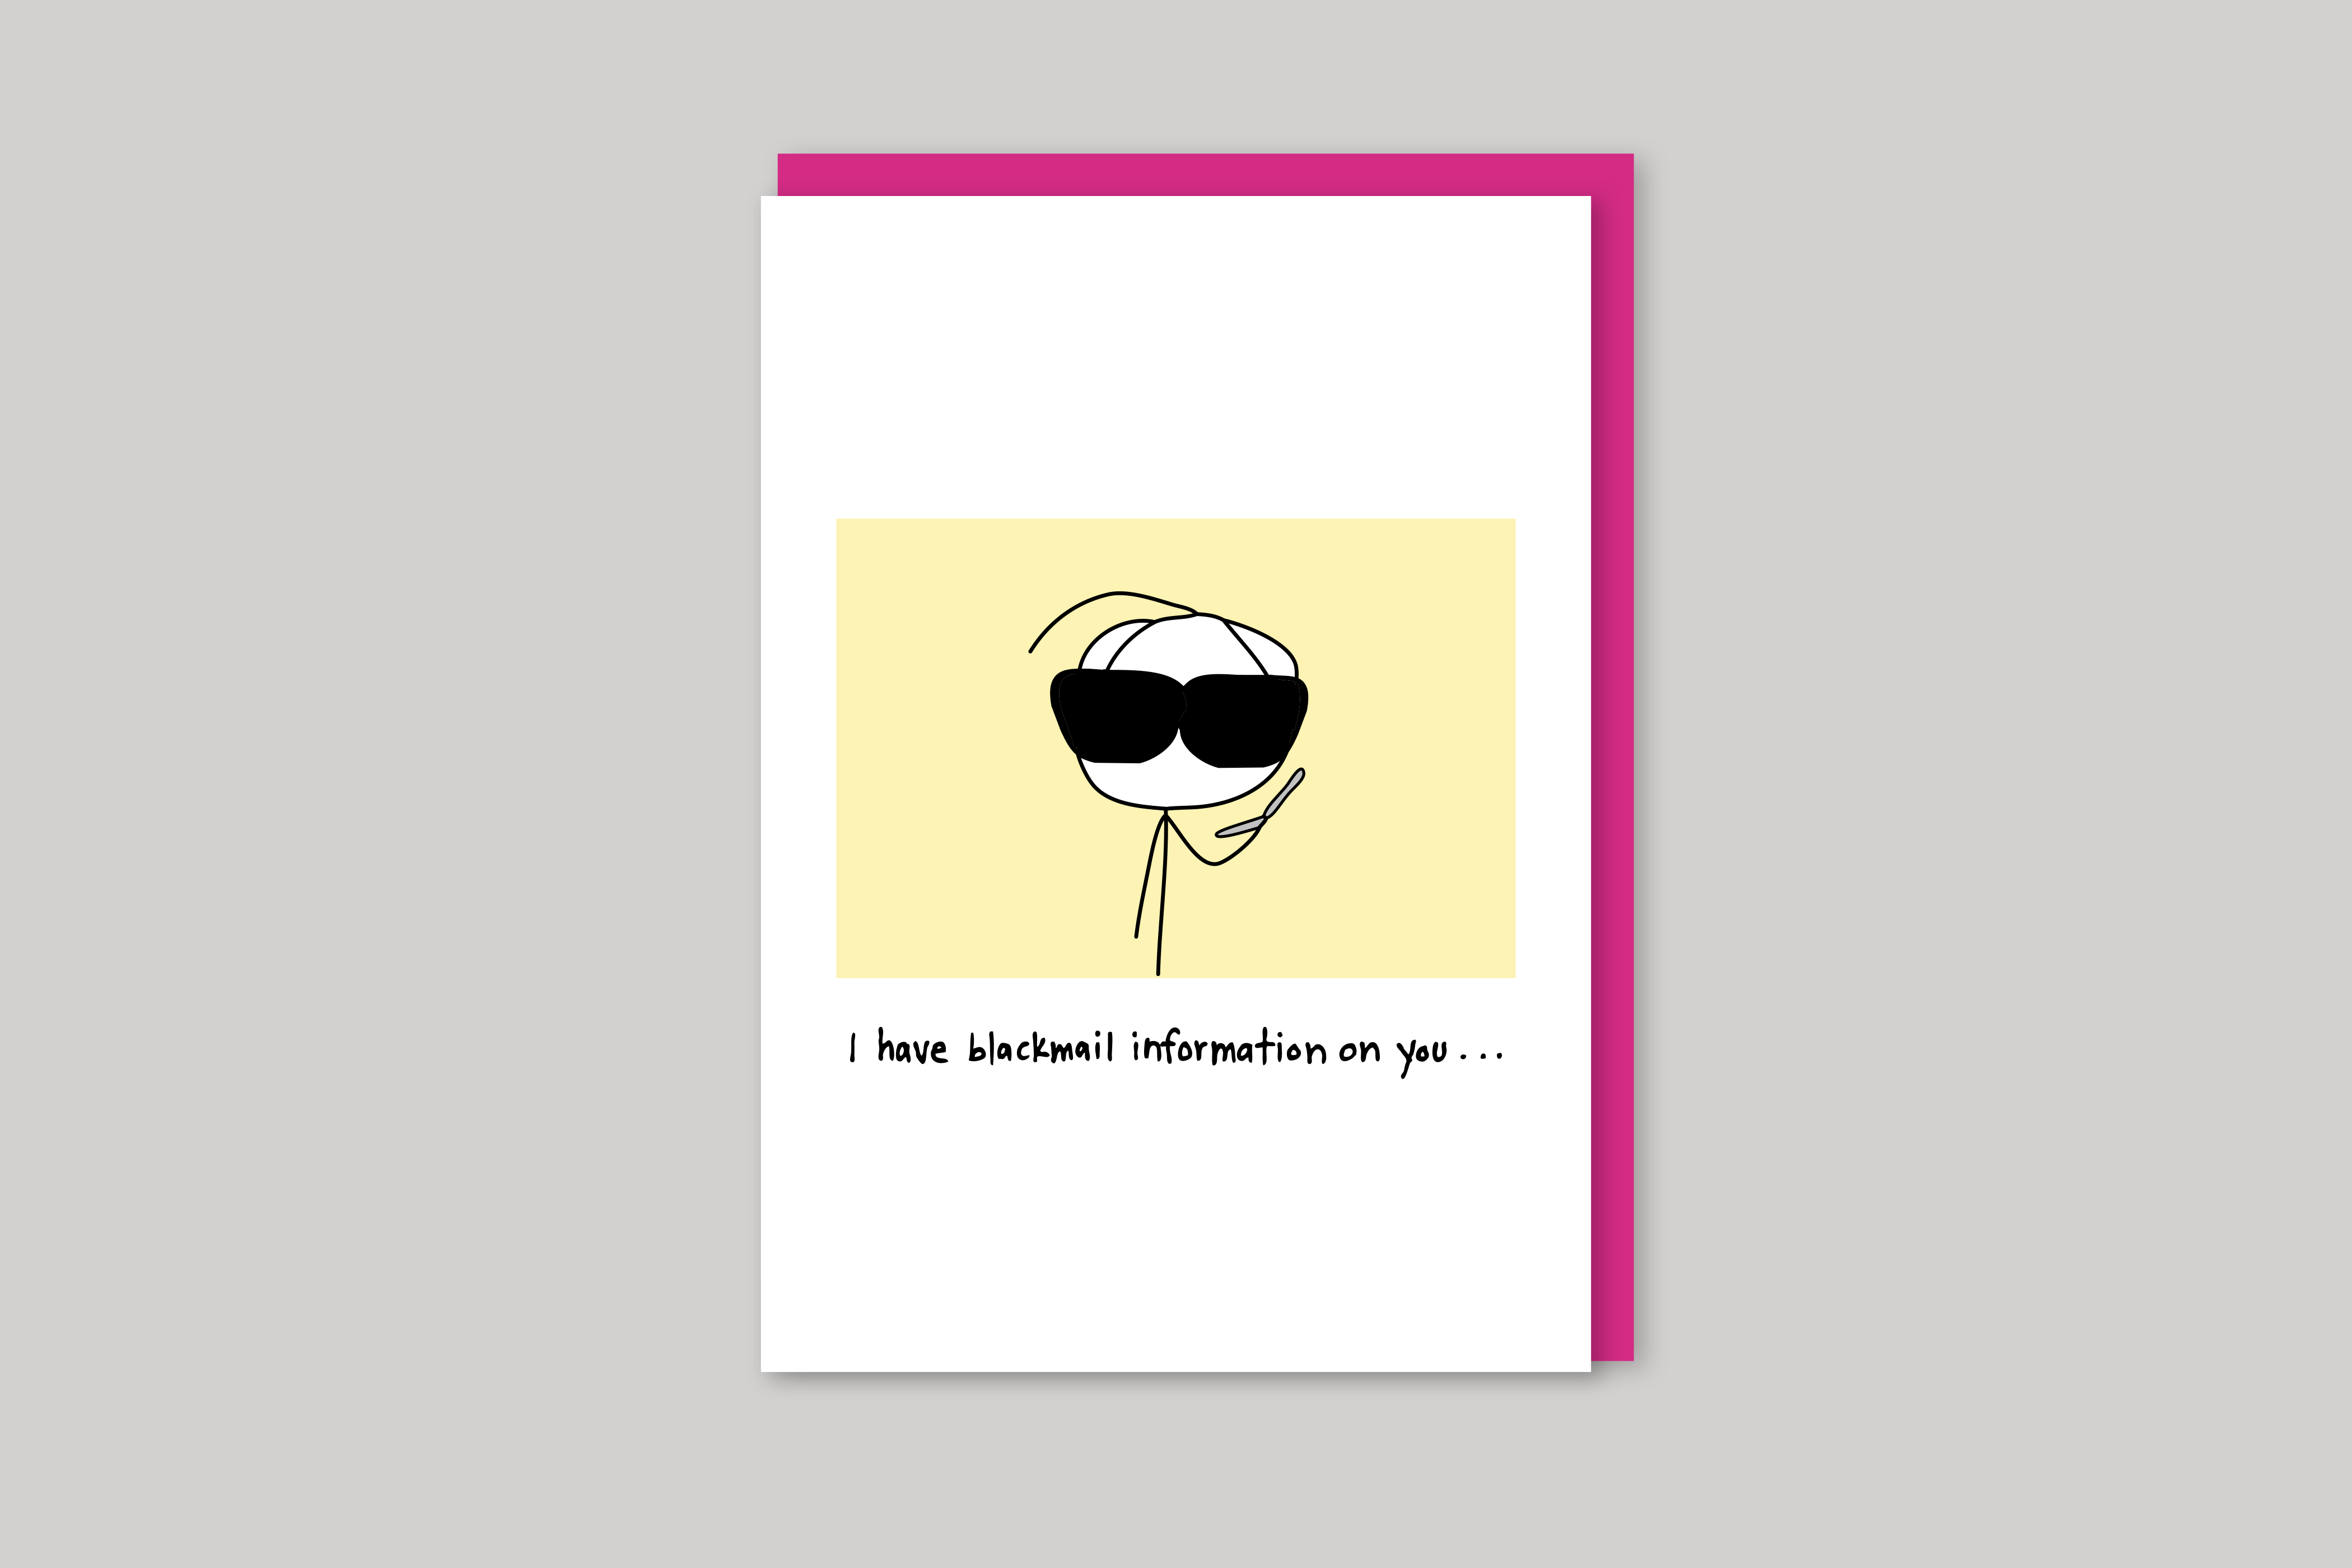 Blackmail Information humorous illustration from Mean Cards range of greeting cards by Icon, back page.